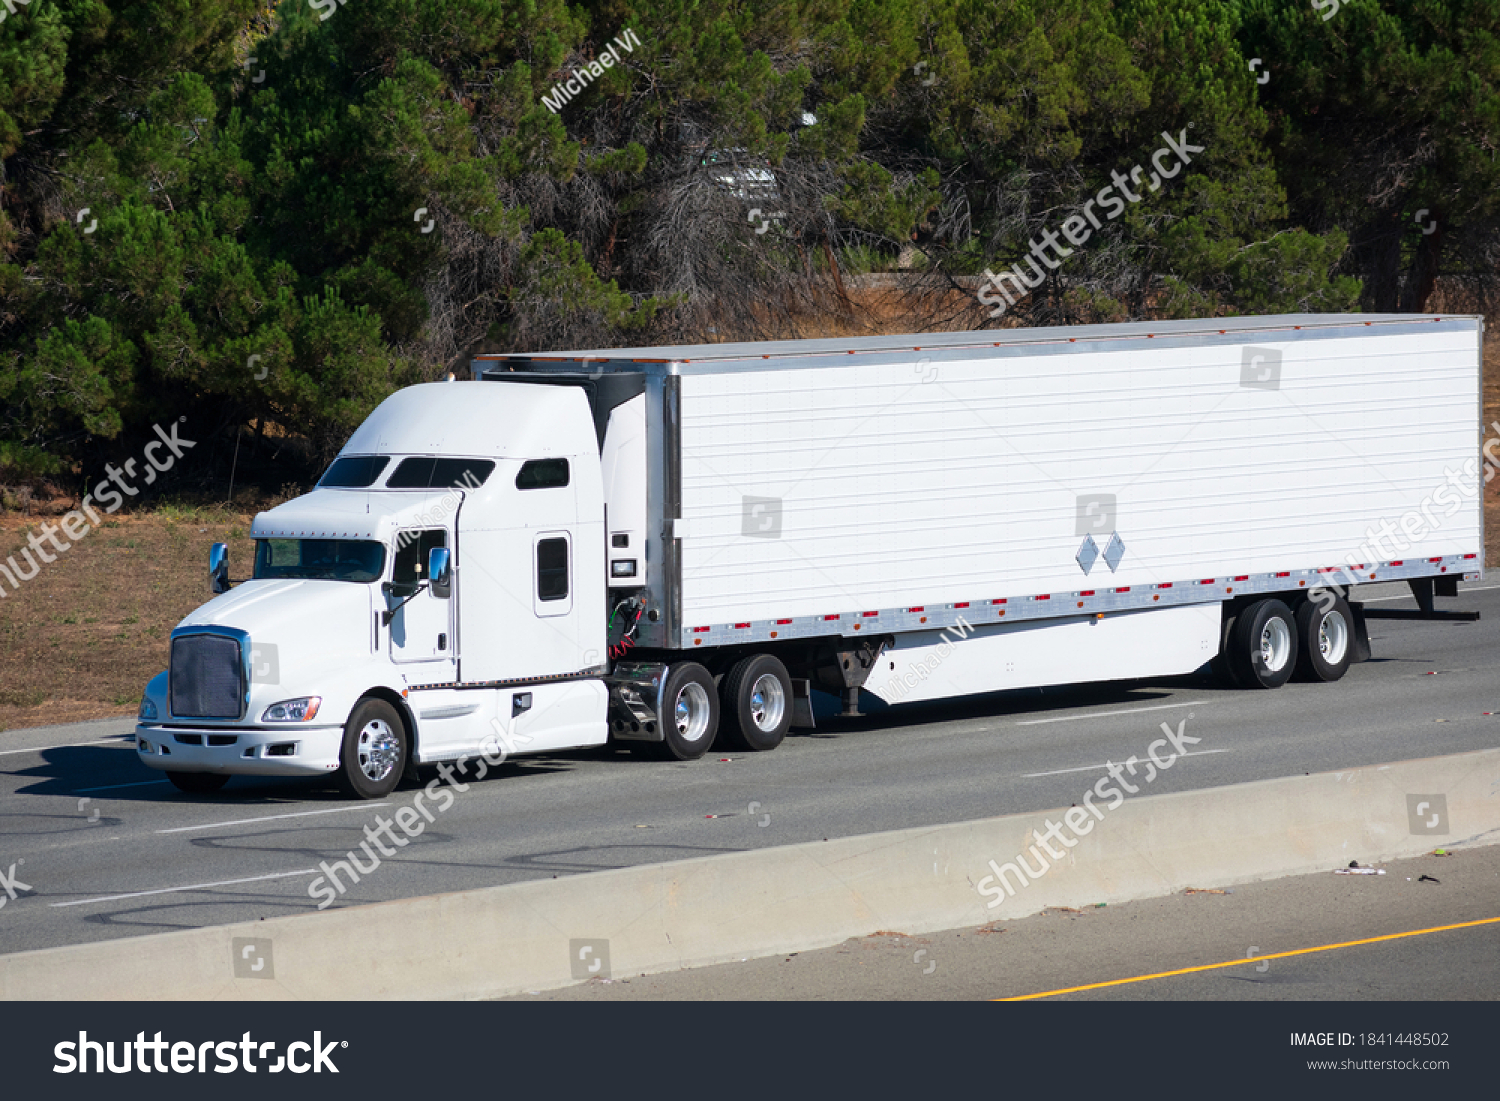 White big rig long haul semi truck transporting commercial cargo in refrigerator semi truck running alone on the eight lanes highway #1841448502